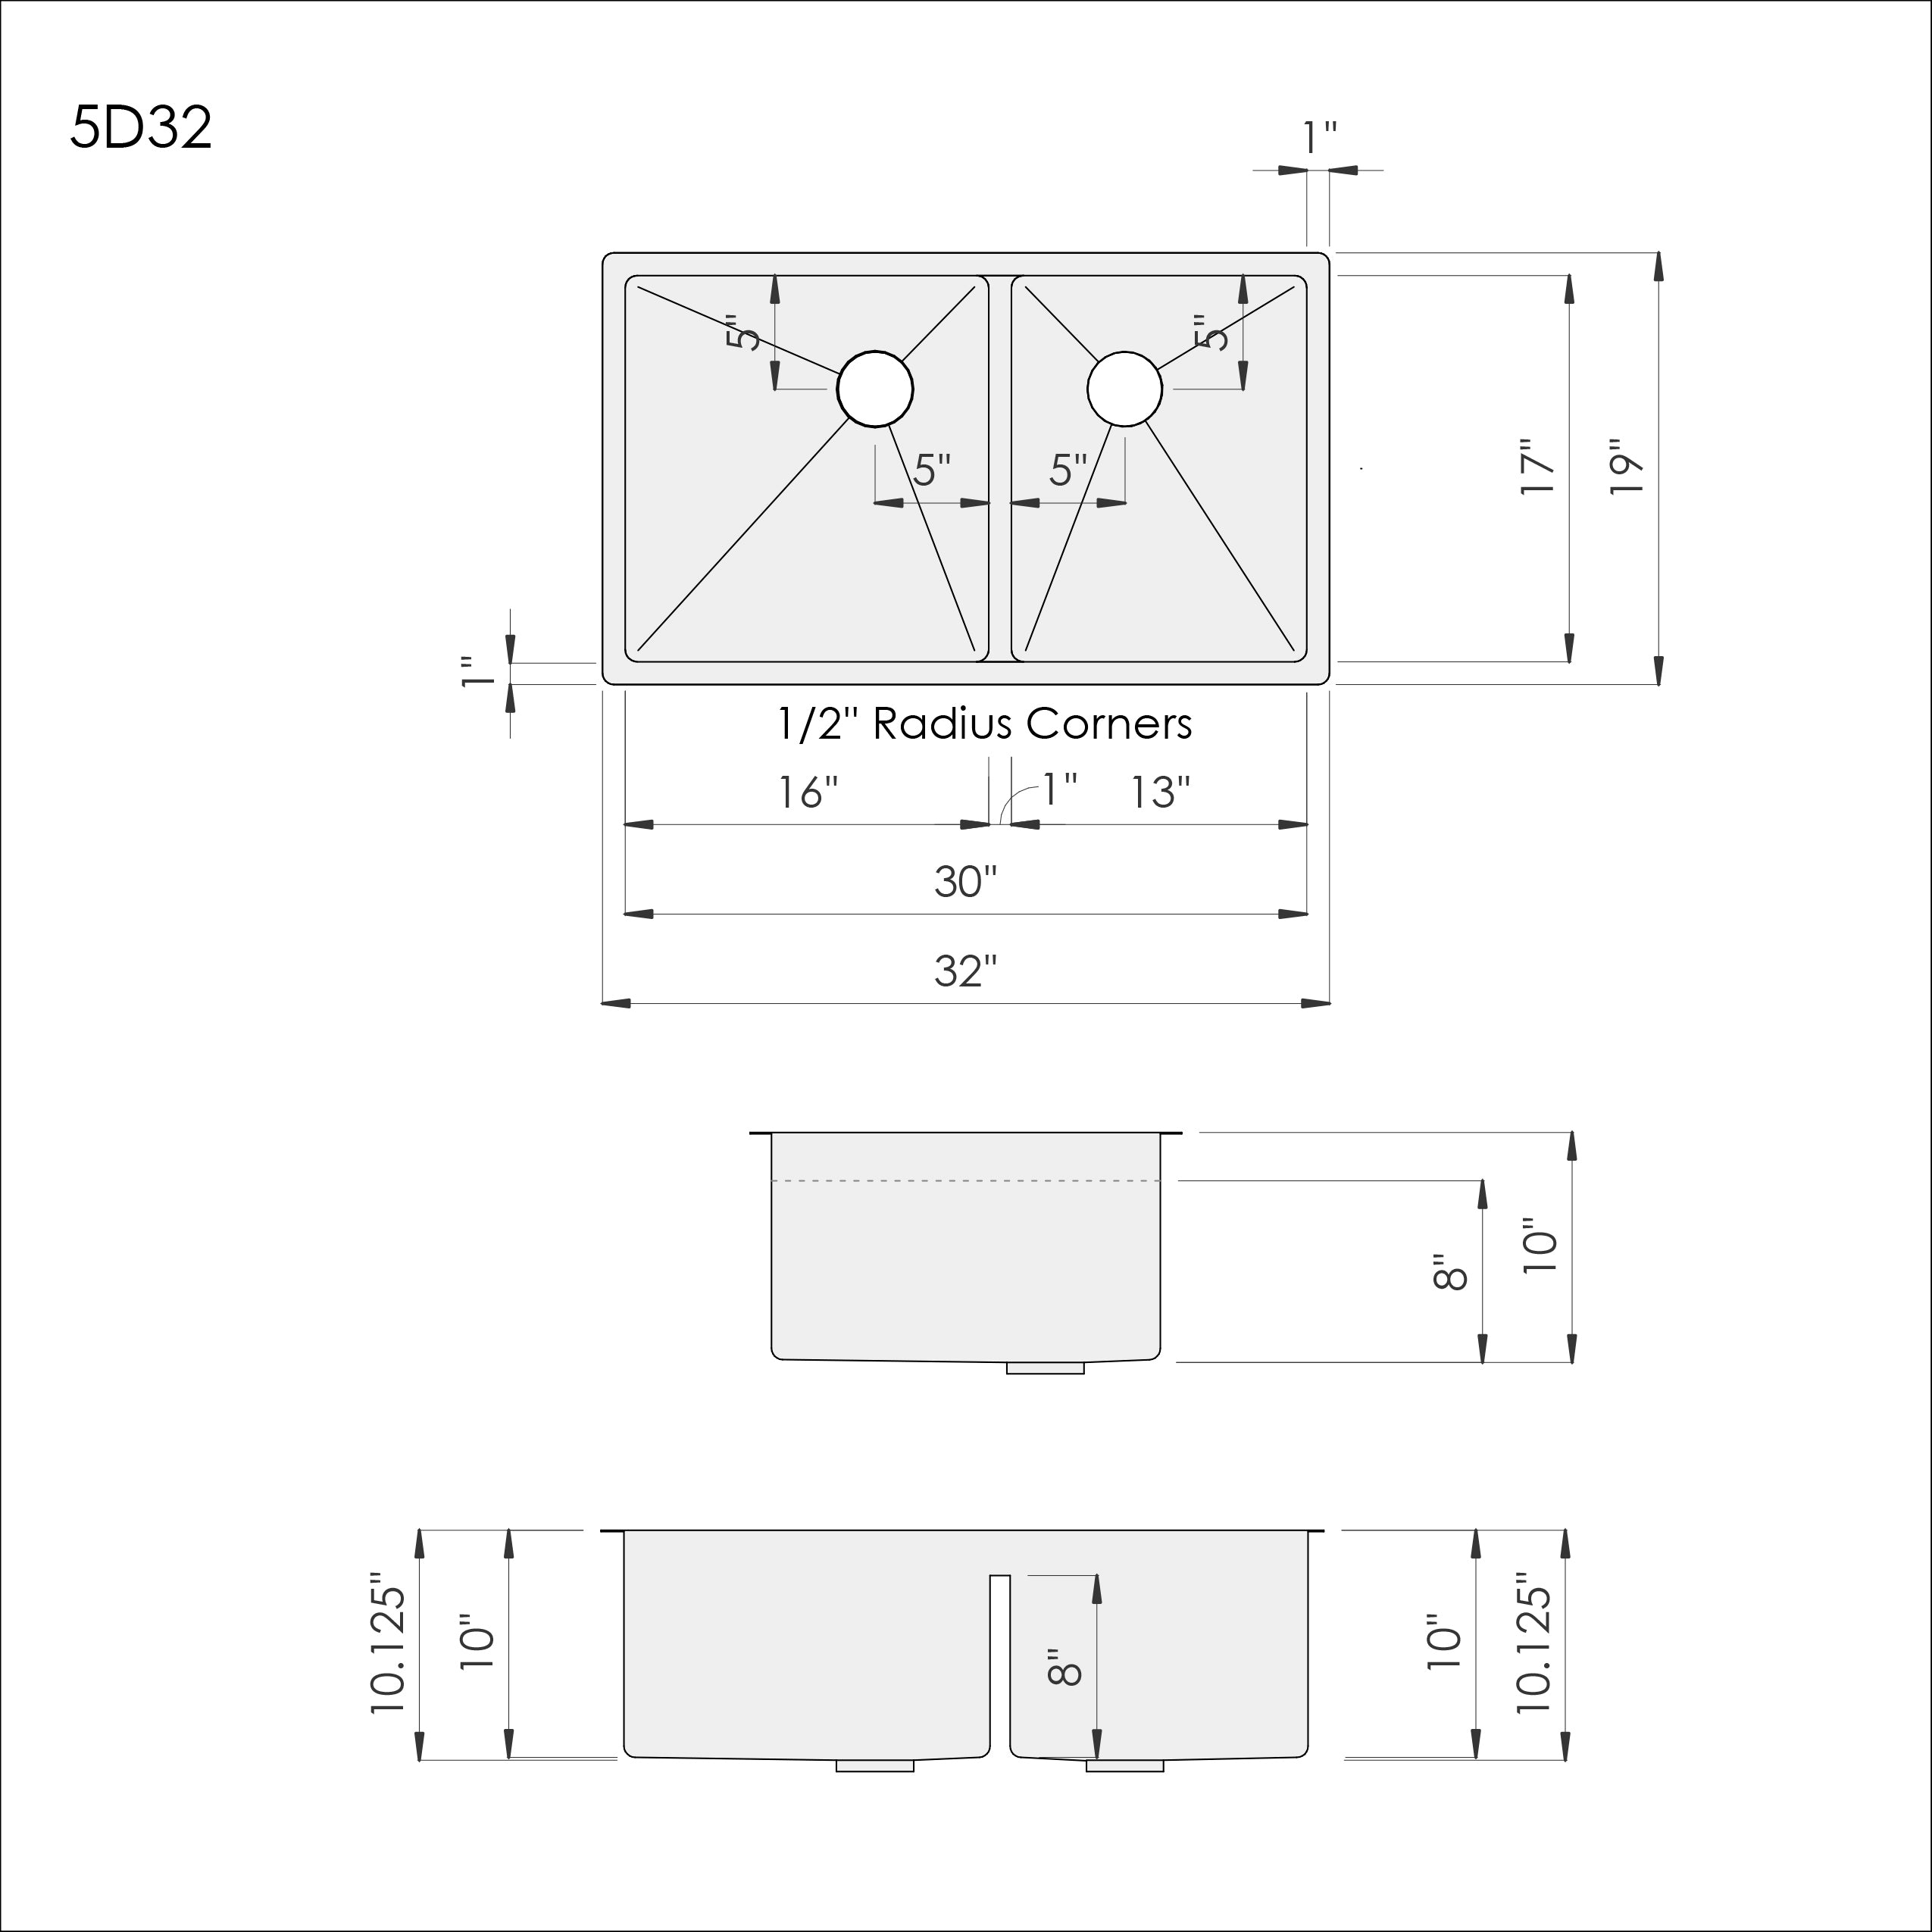 Dimensions of Create Good Sinks' 32" Stainless Steel double bowl kitchen sink with half inch radius corners and low divider